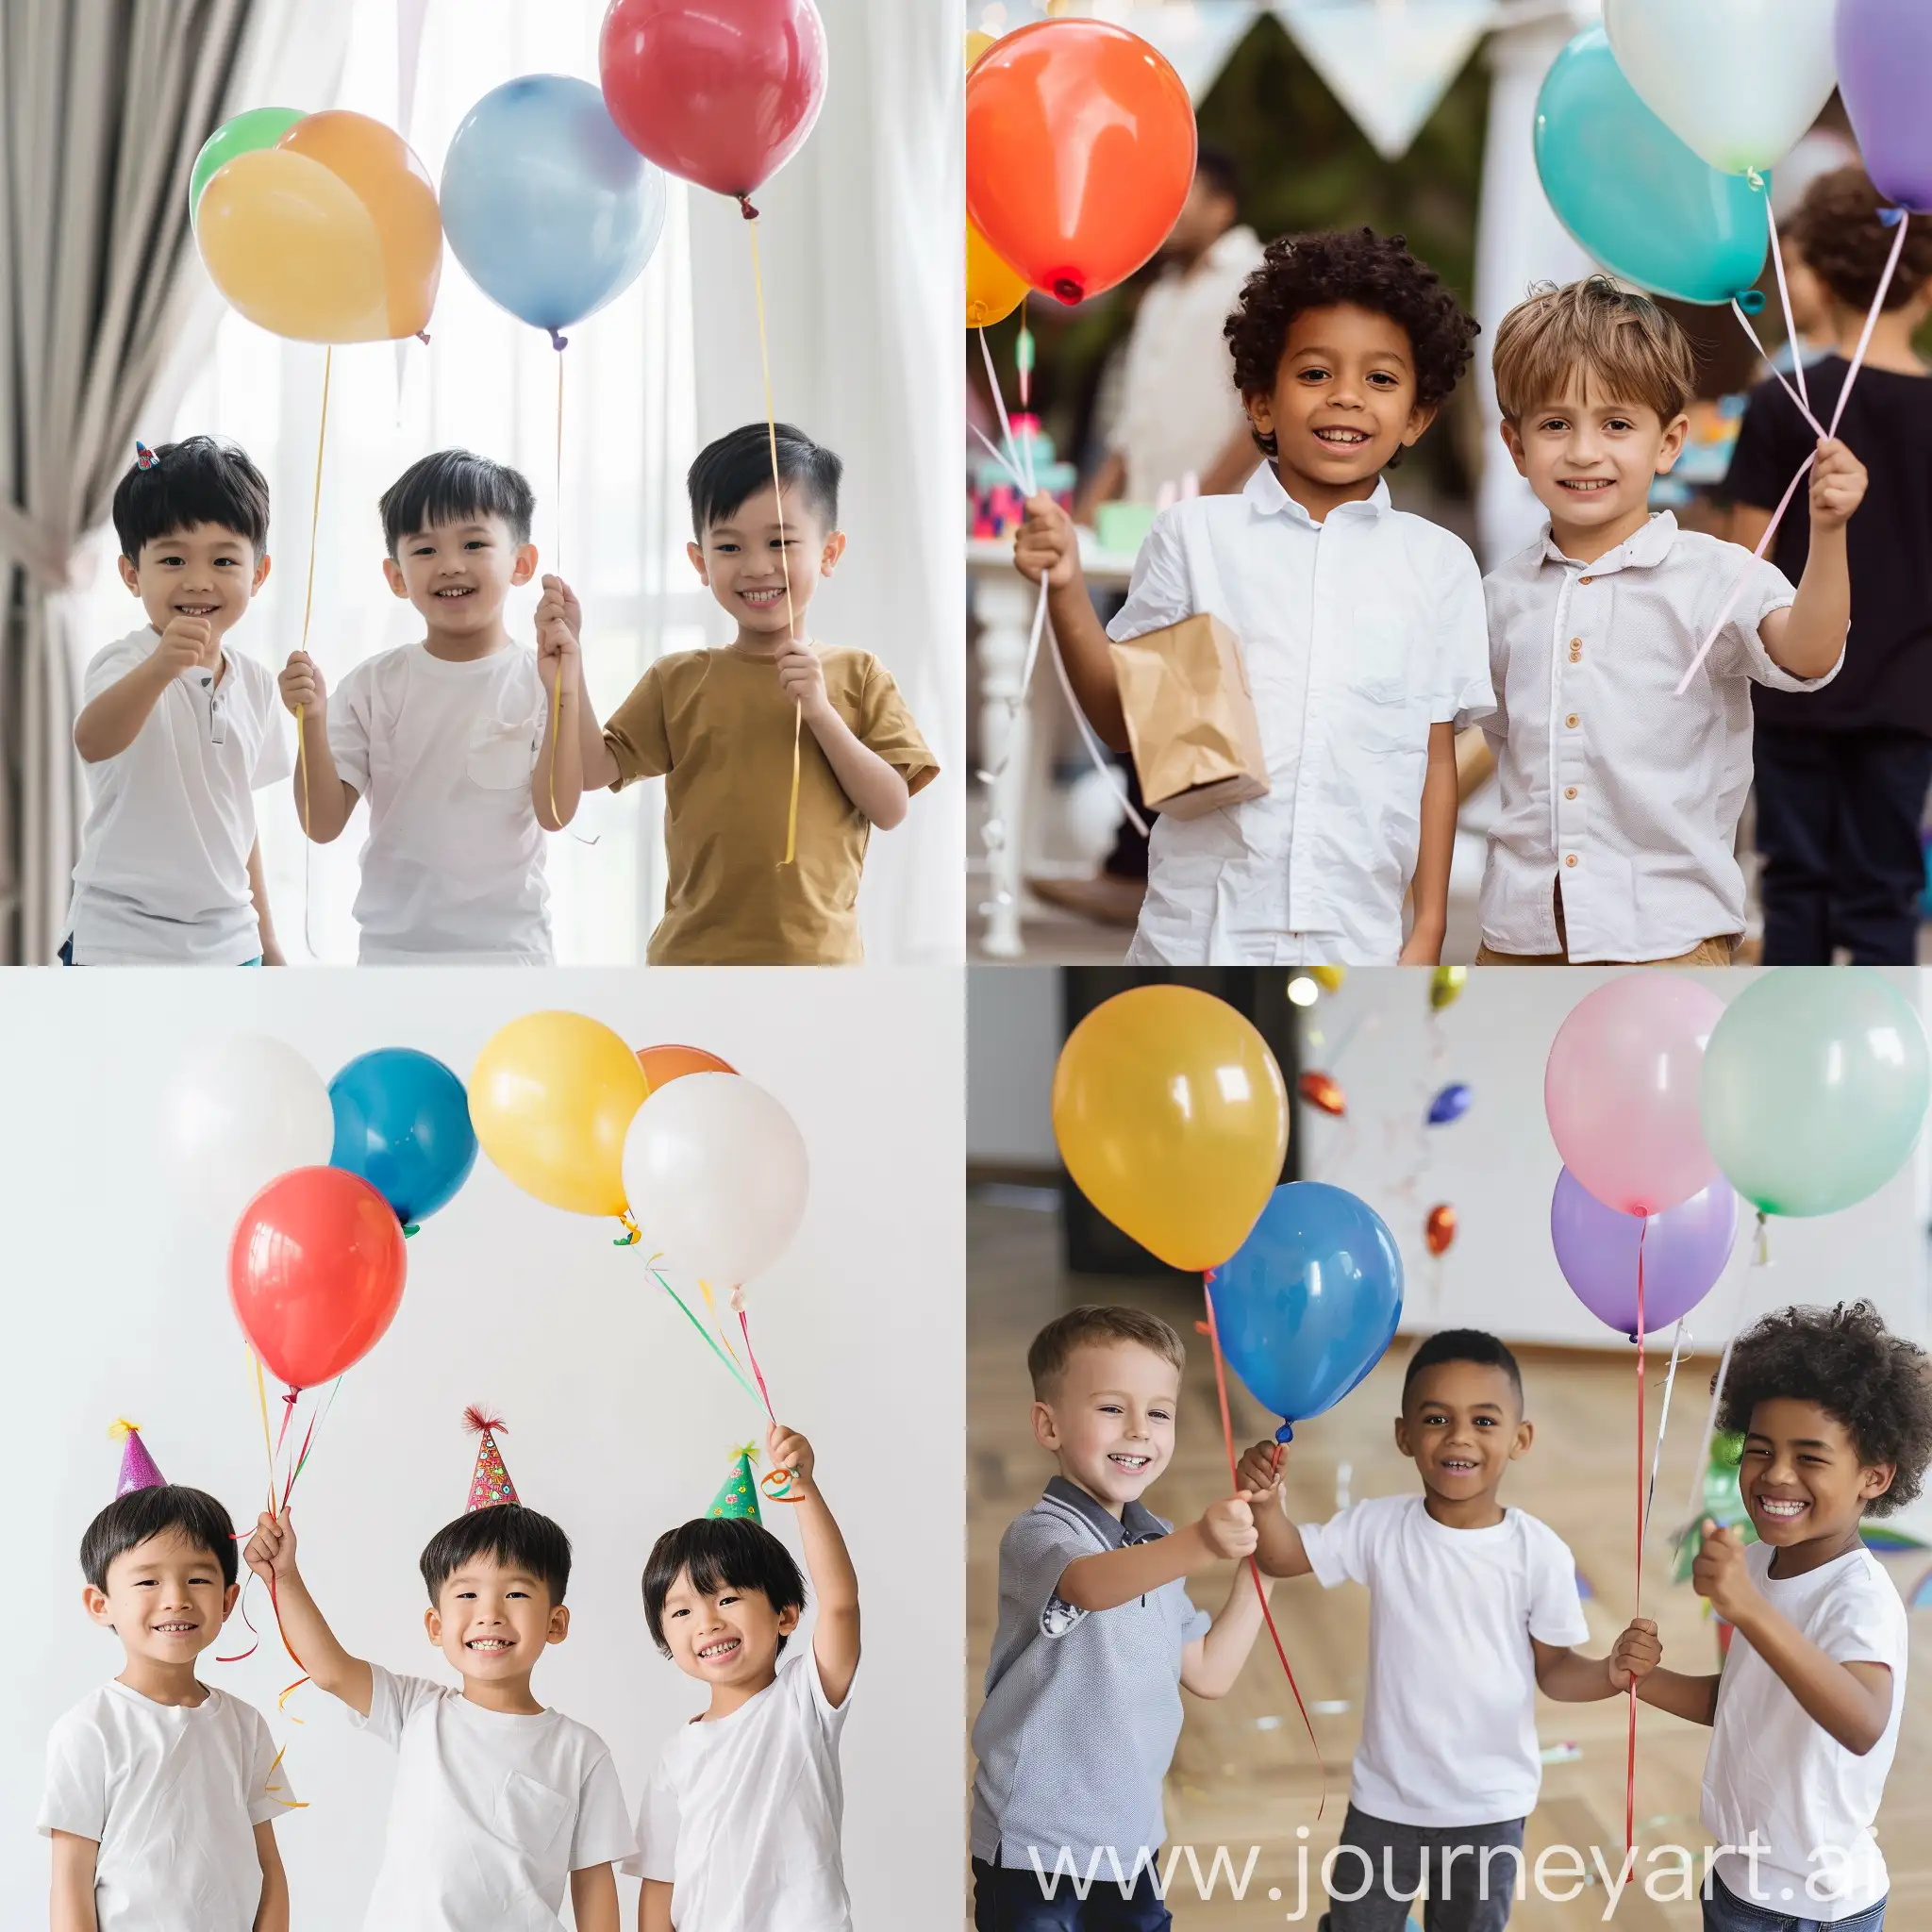 Boys-with-Black-Hair-Holding-Balloons-at-Happy-Birthday-Party